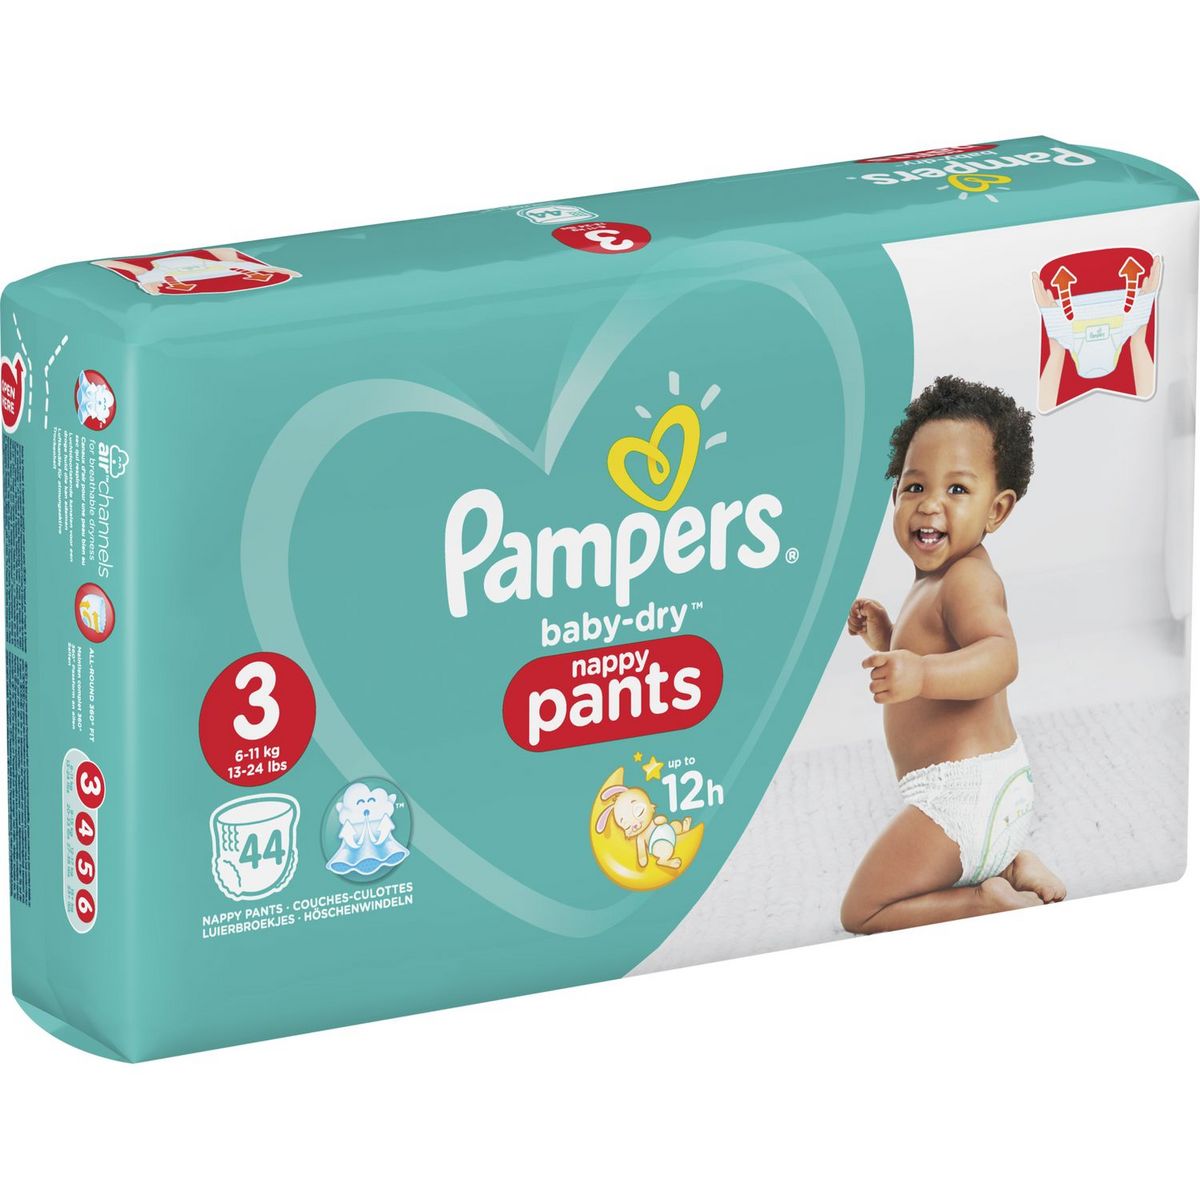 PAMPERS Baby-dry pants couches-culottes taille 3 (6-11kg) 44